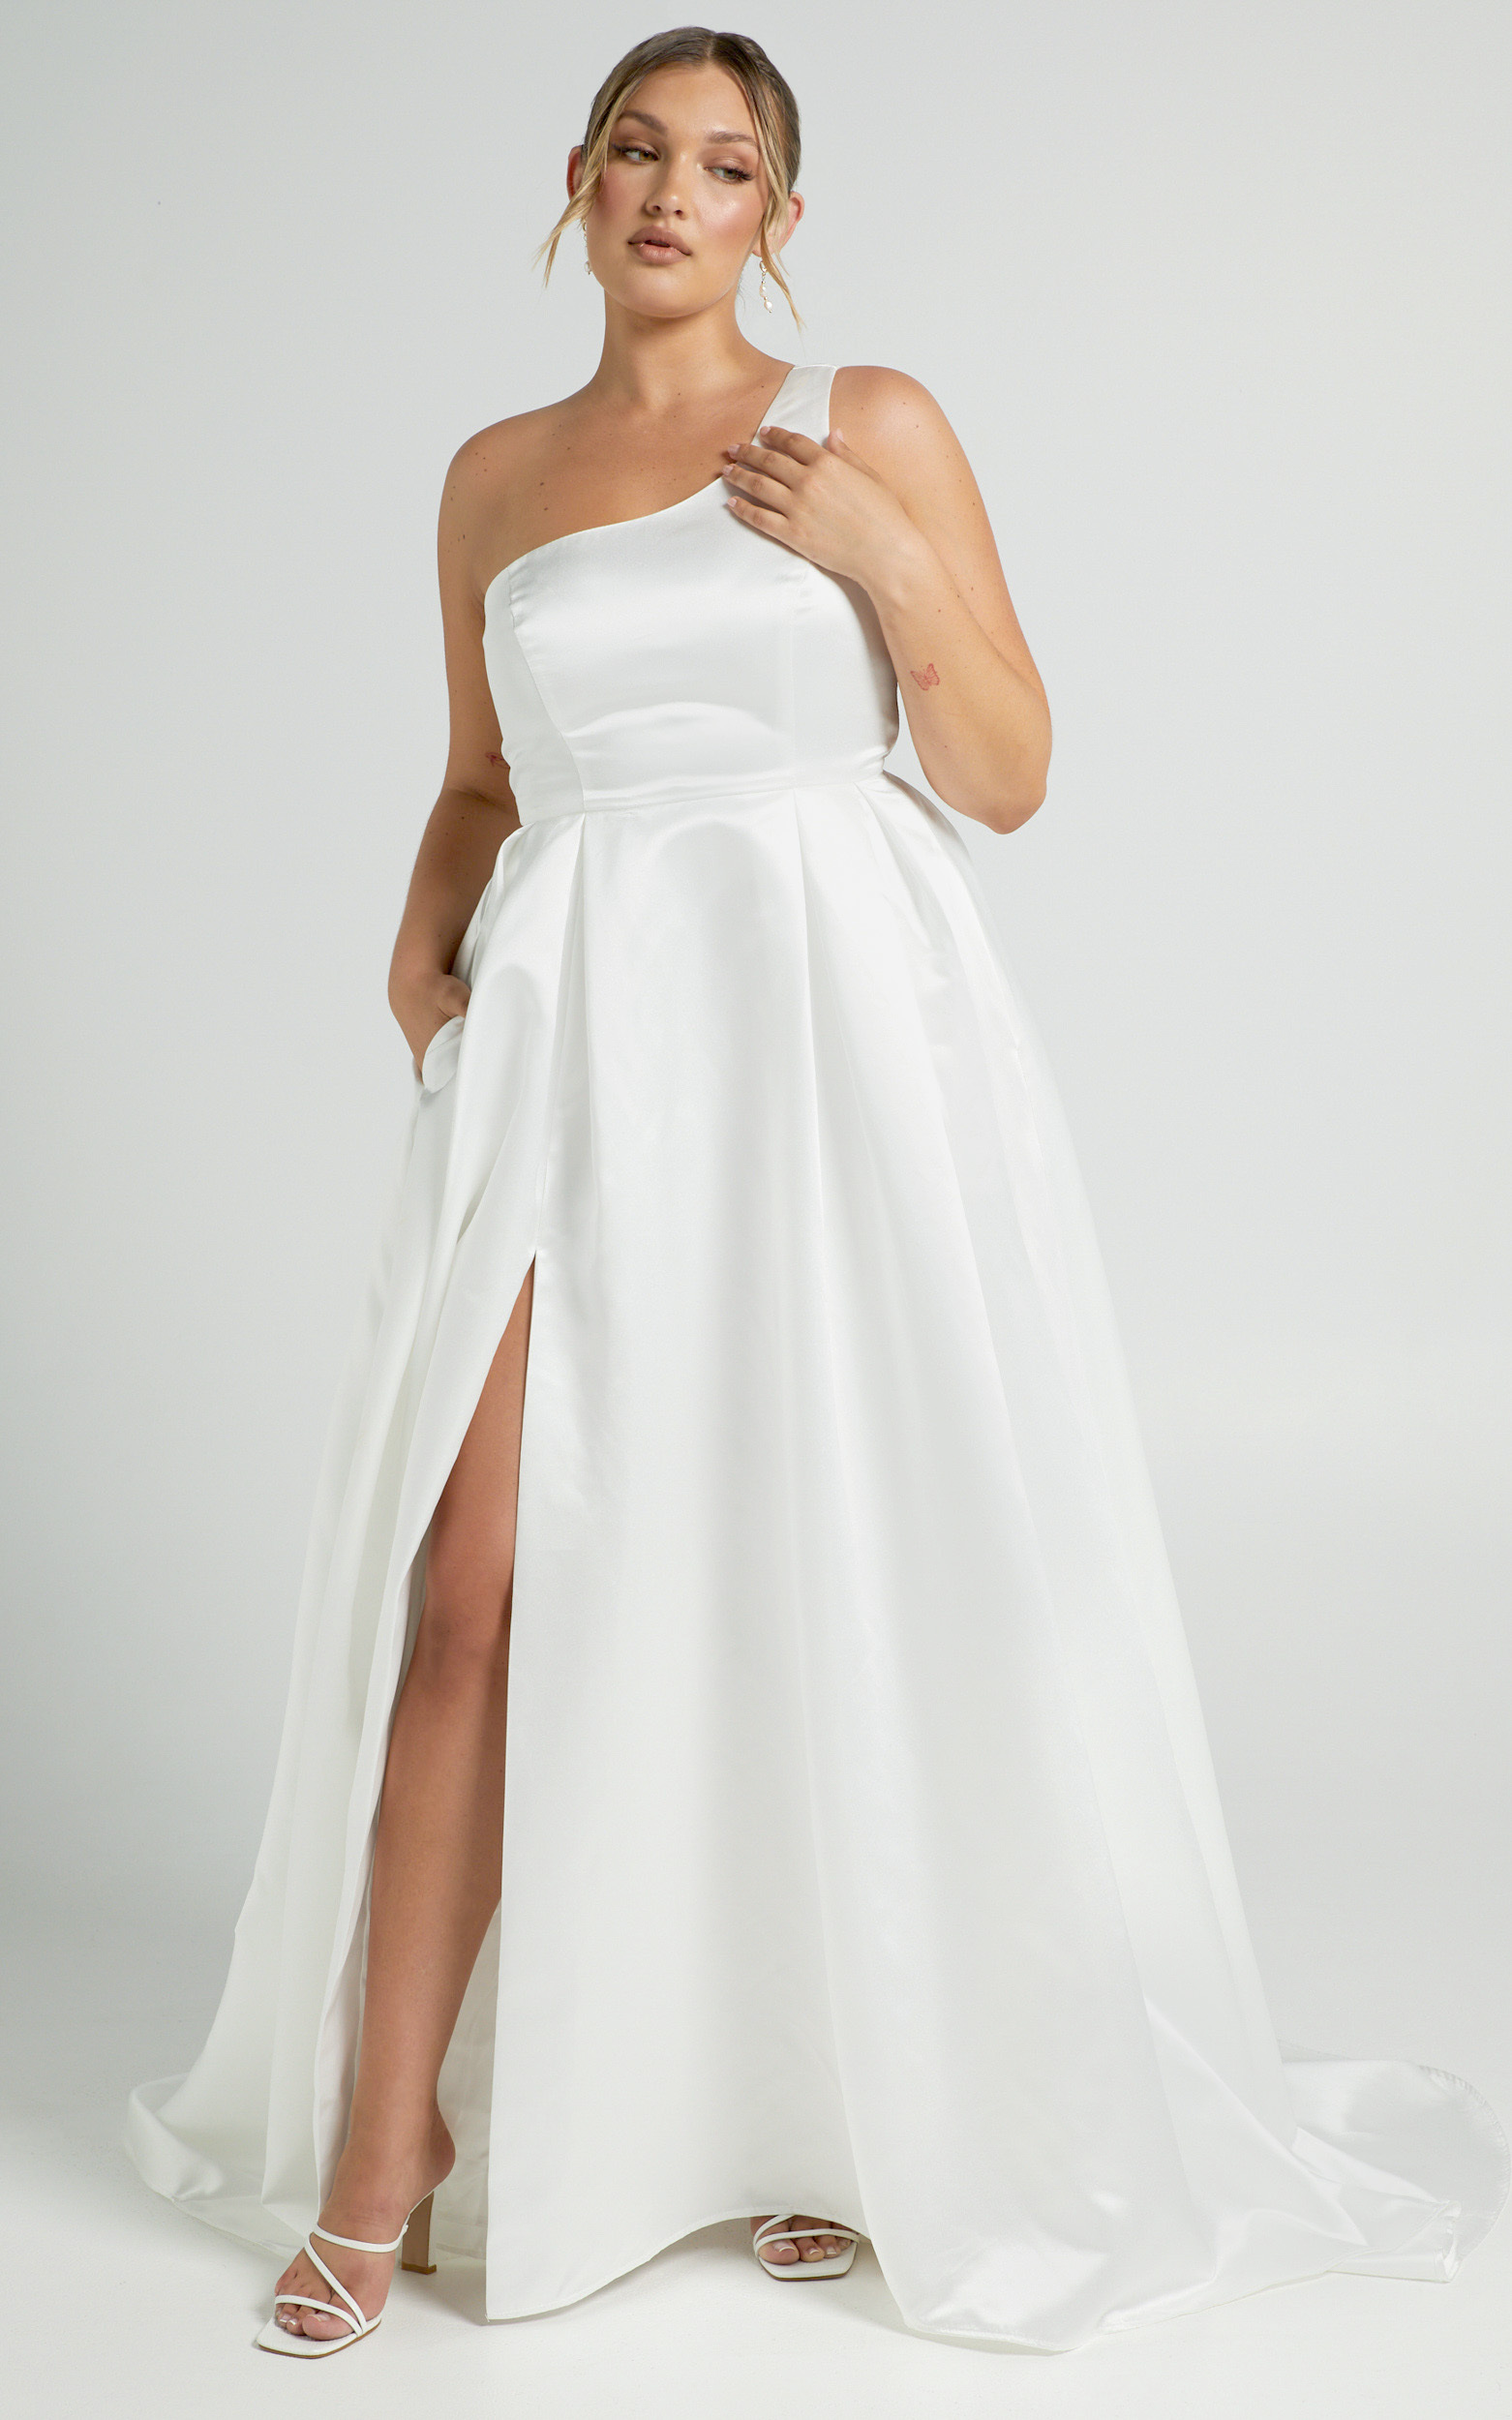 Desire Me One Shoulder Thigh Split Gown in Ivory Satin - 04, WHT1, hi-res image number null